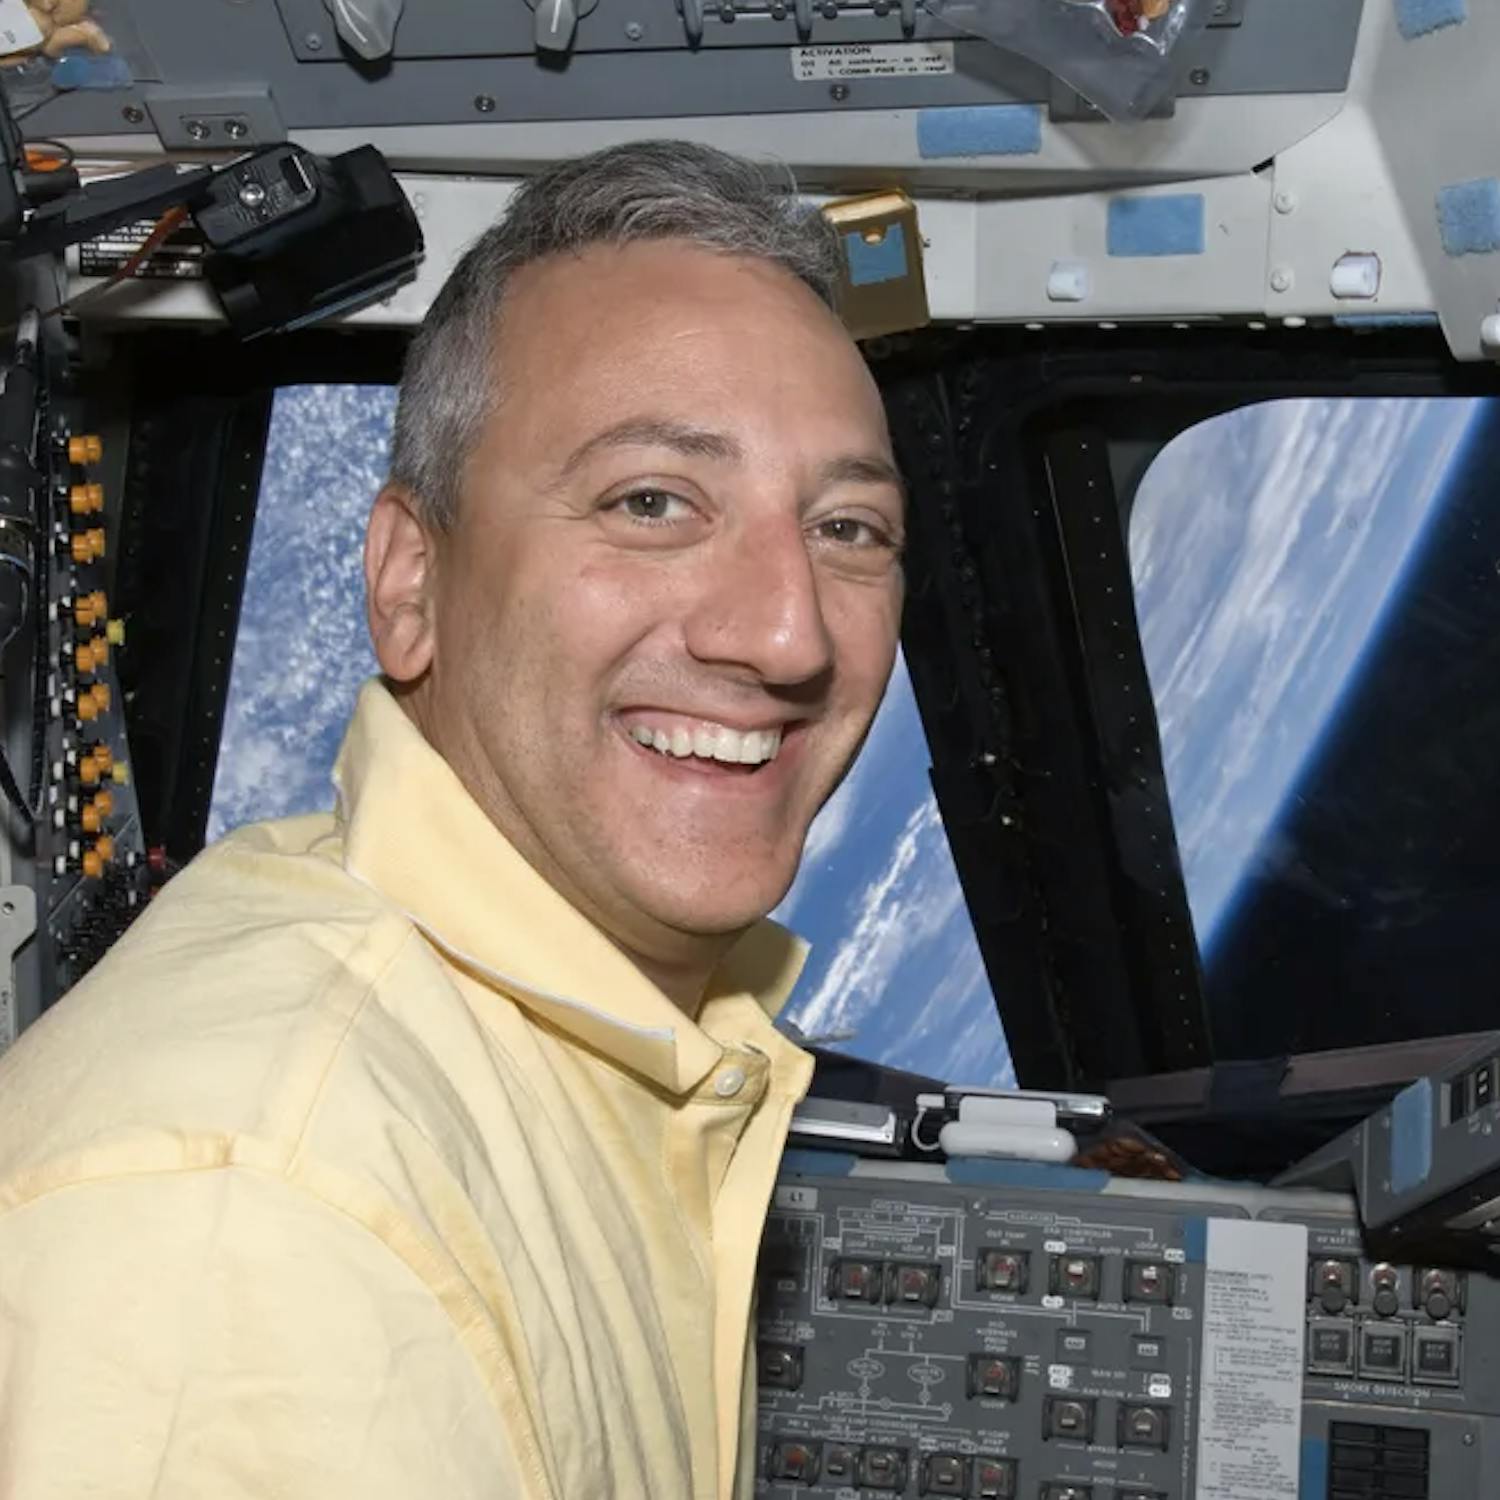 Moonshot success, with astronaut Mike Massimino